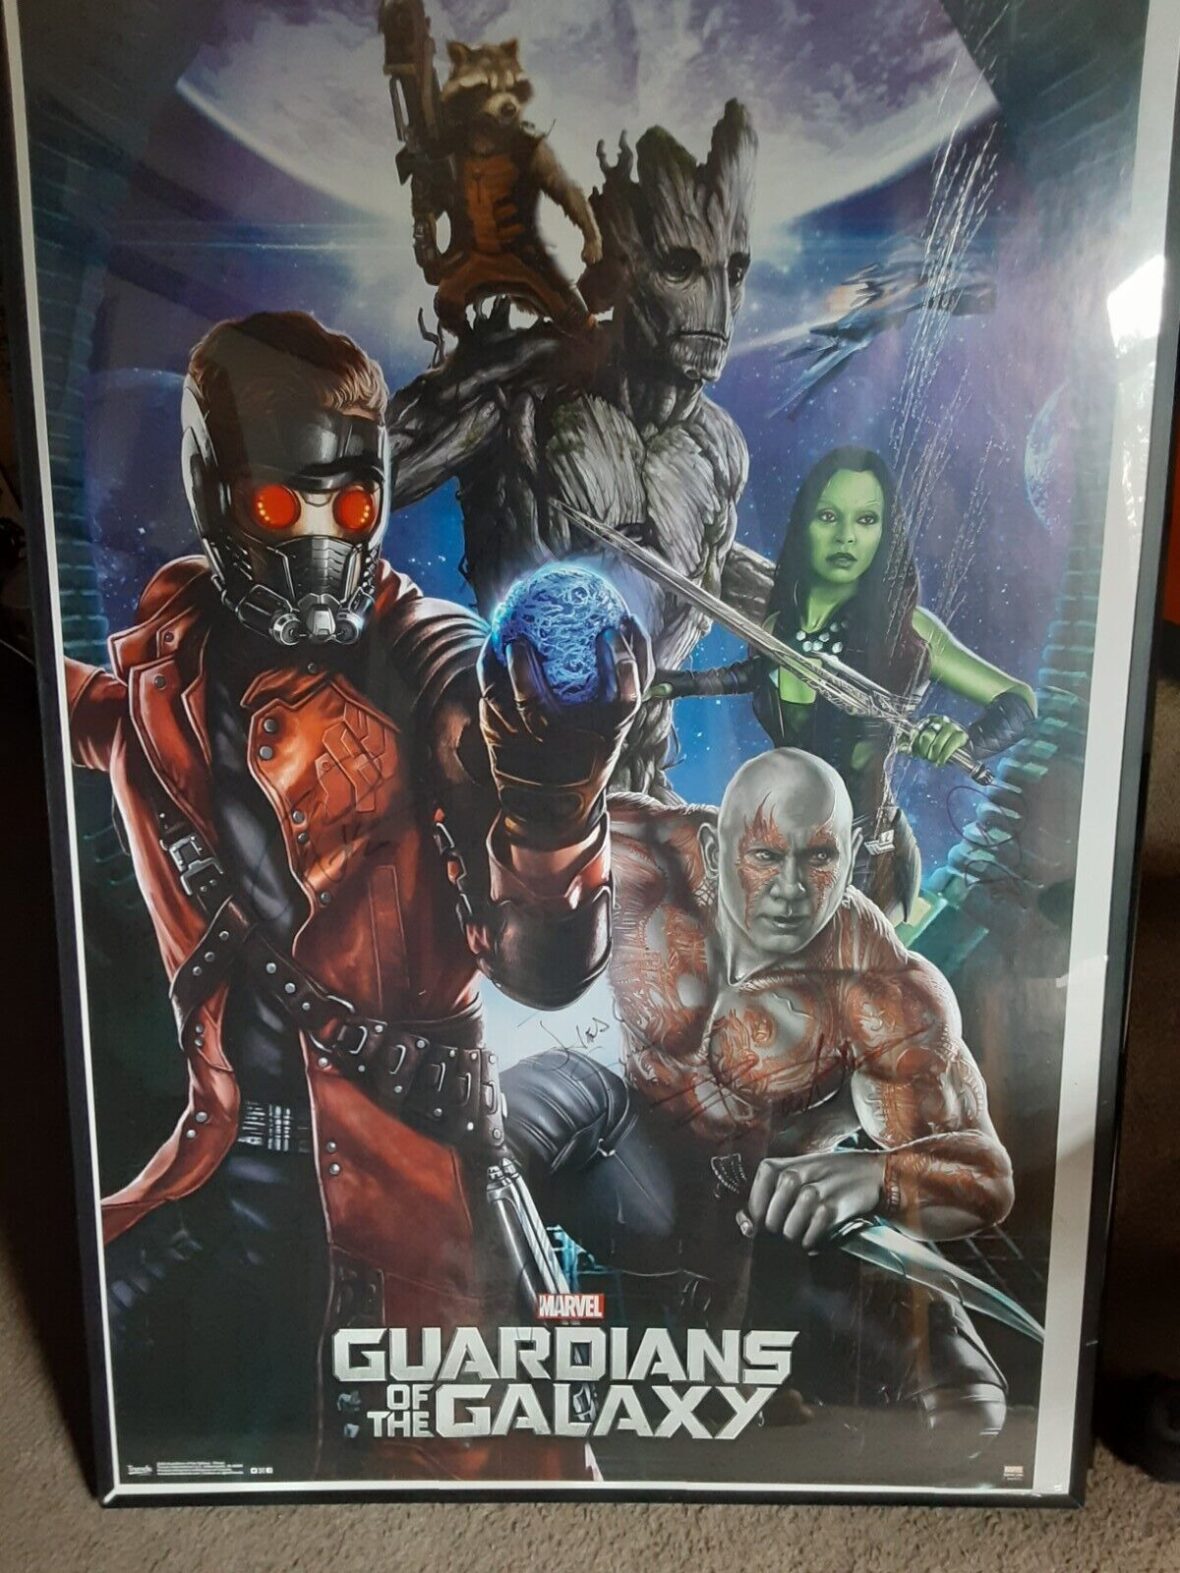 Most Valuable Guardians of the Galaxy Memorabilia: Opening Day Signed Poster